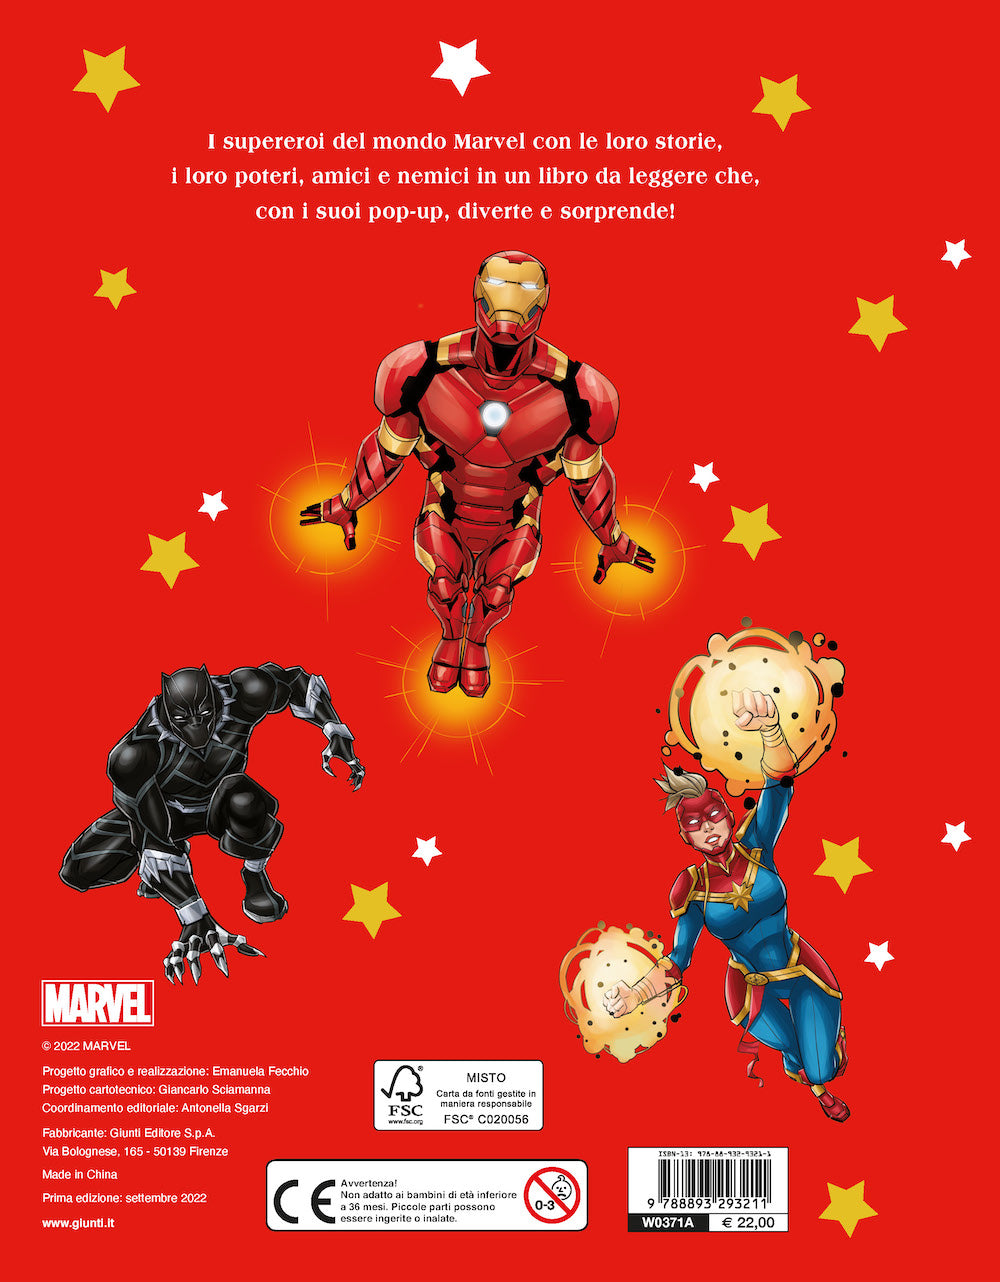 Marvel Libro Pop-up::Supereroi in 3D